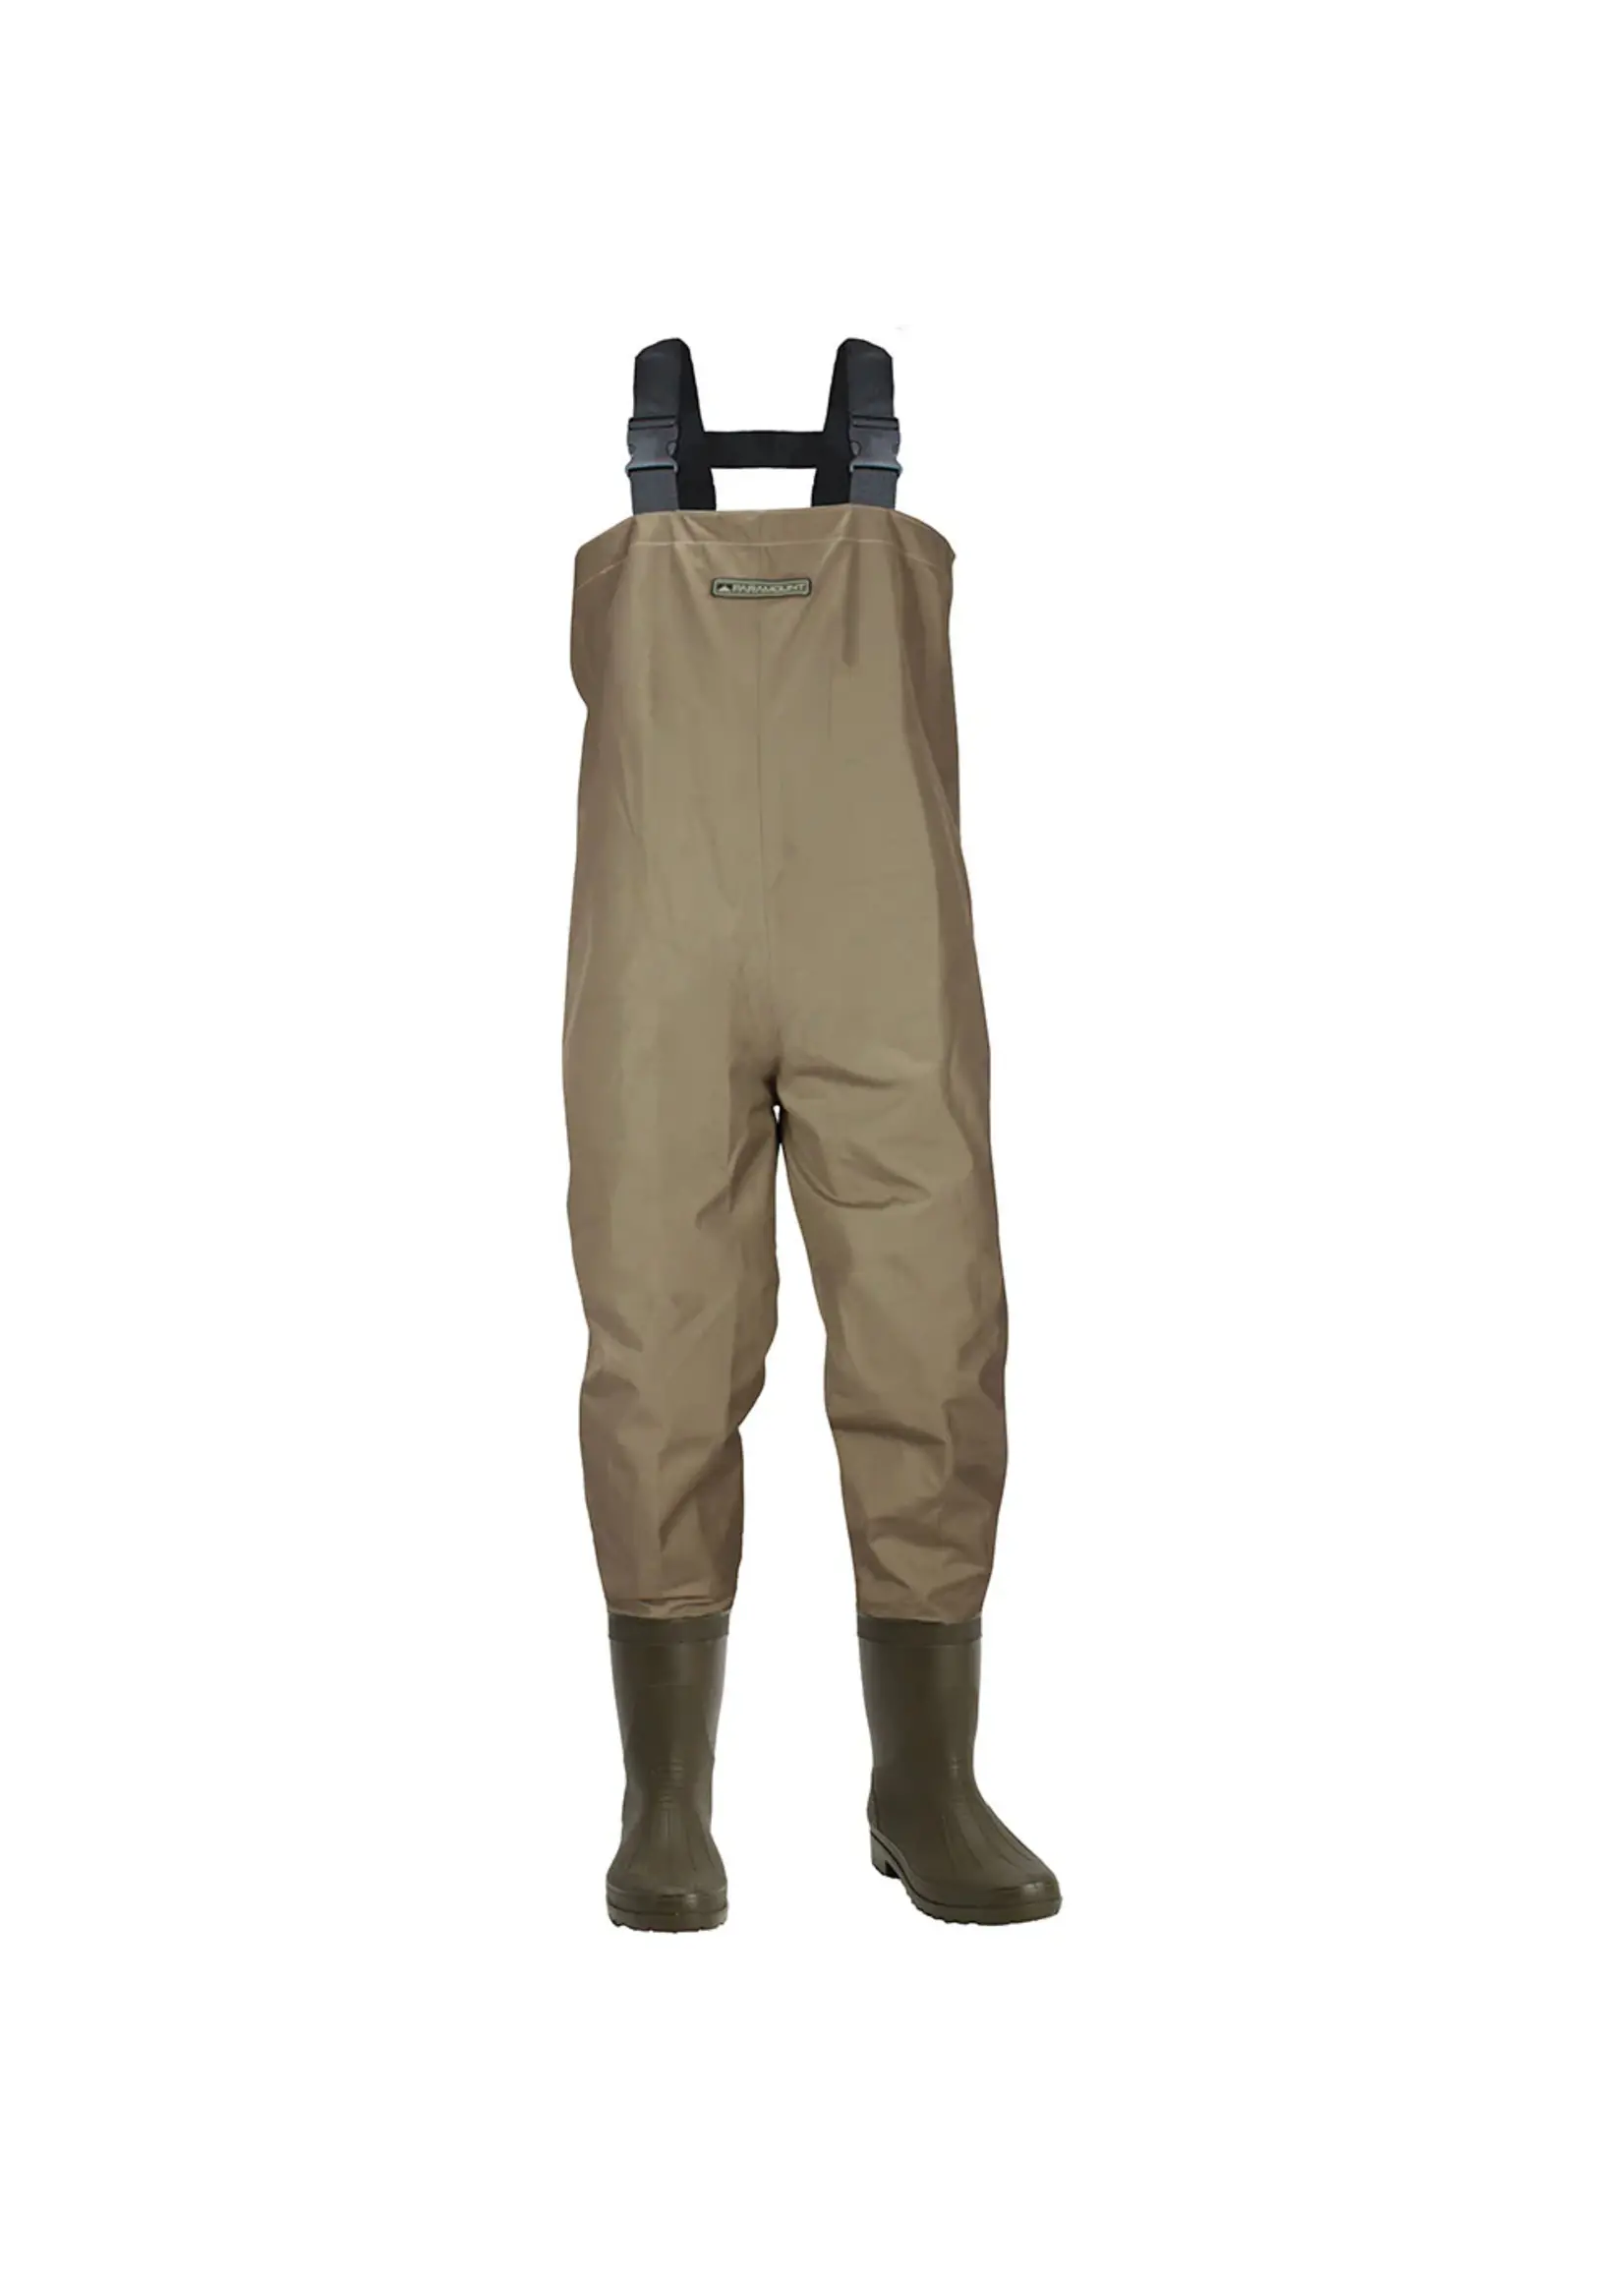 Paramount Paramount Slipstream Men's 2 Ply Nylon / Pvc Cleated Bootfoot Chest Waders